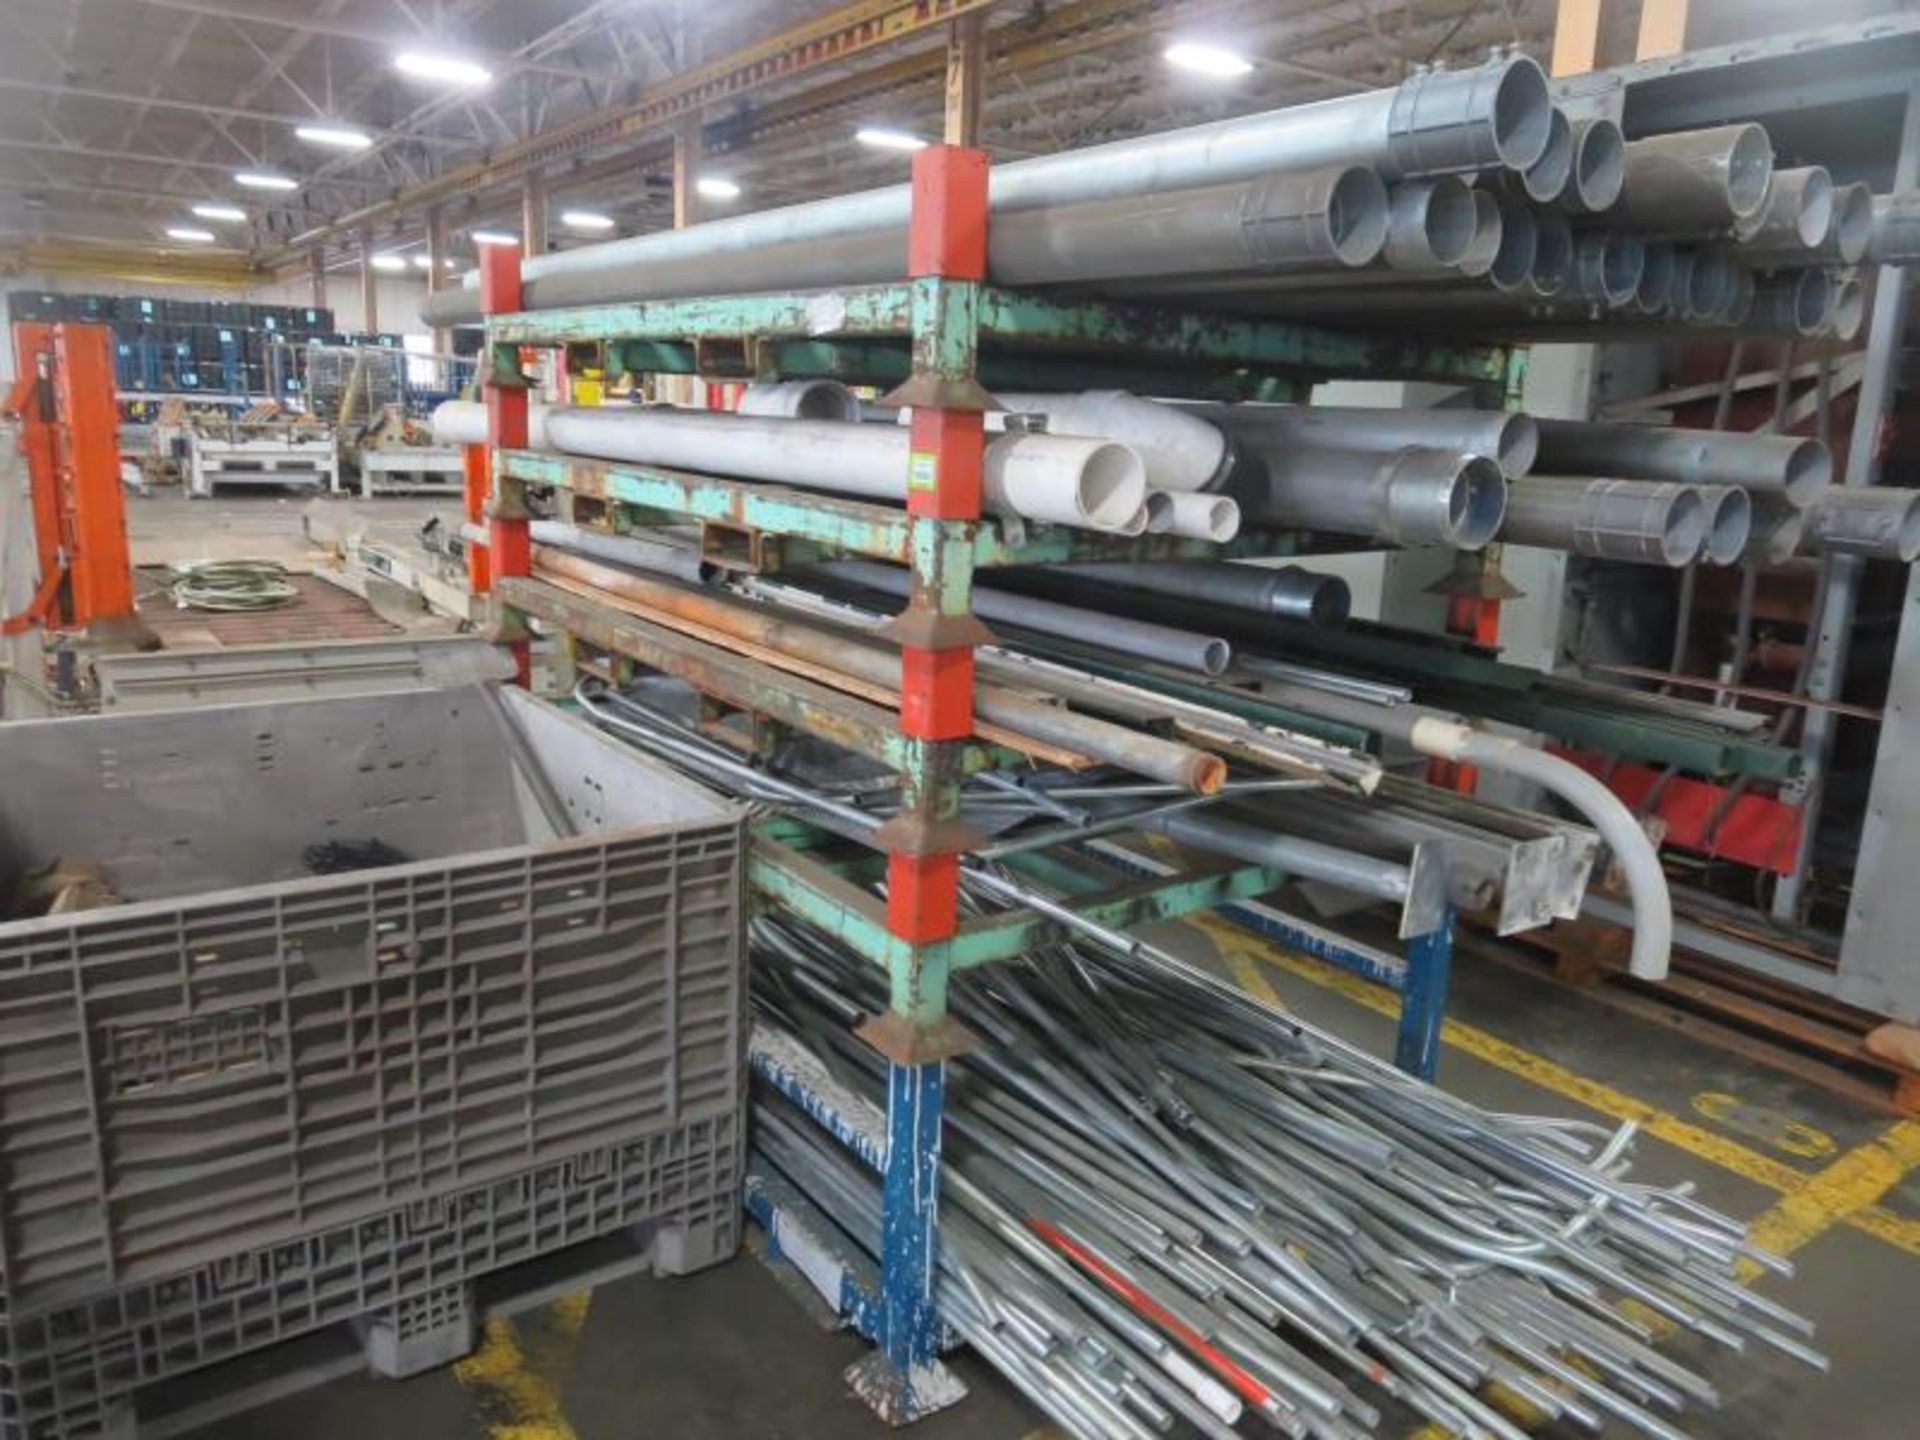 Lot (Qty 2) Electrical Conduit & Fittings. Contents of Rack & Tote, consisting of various conduit